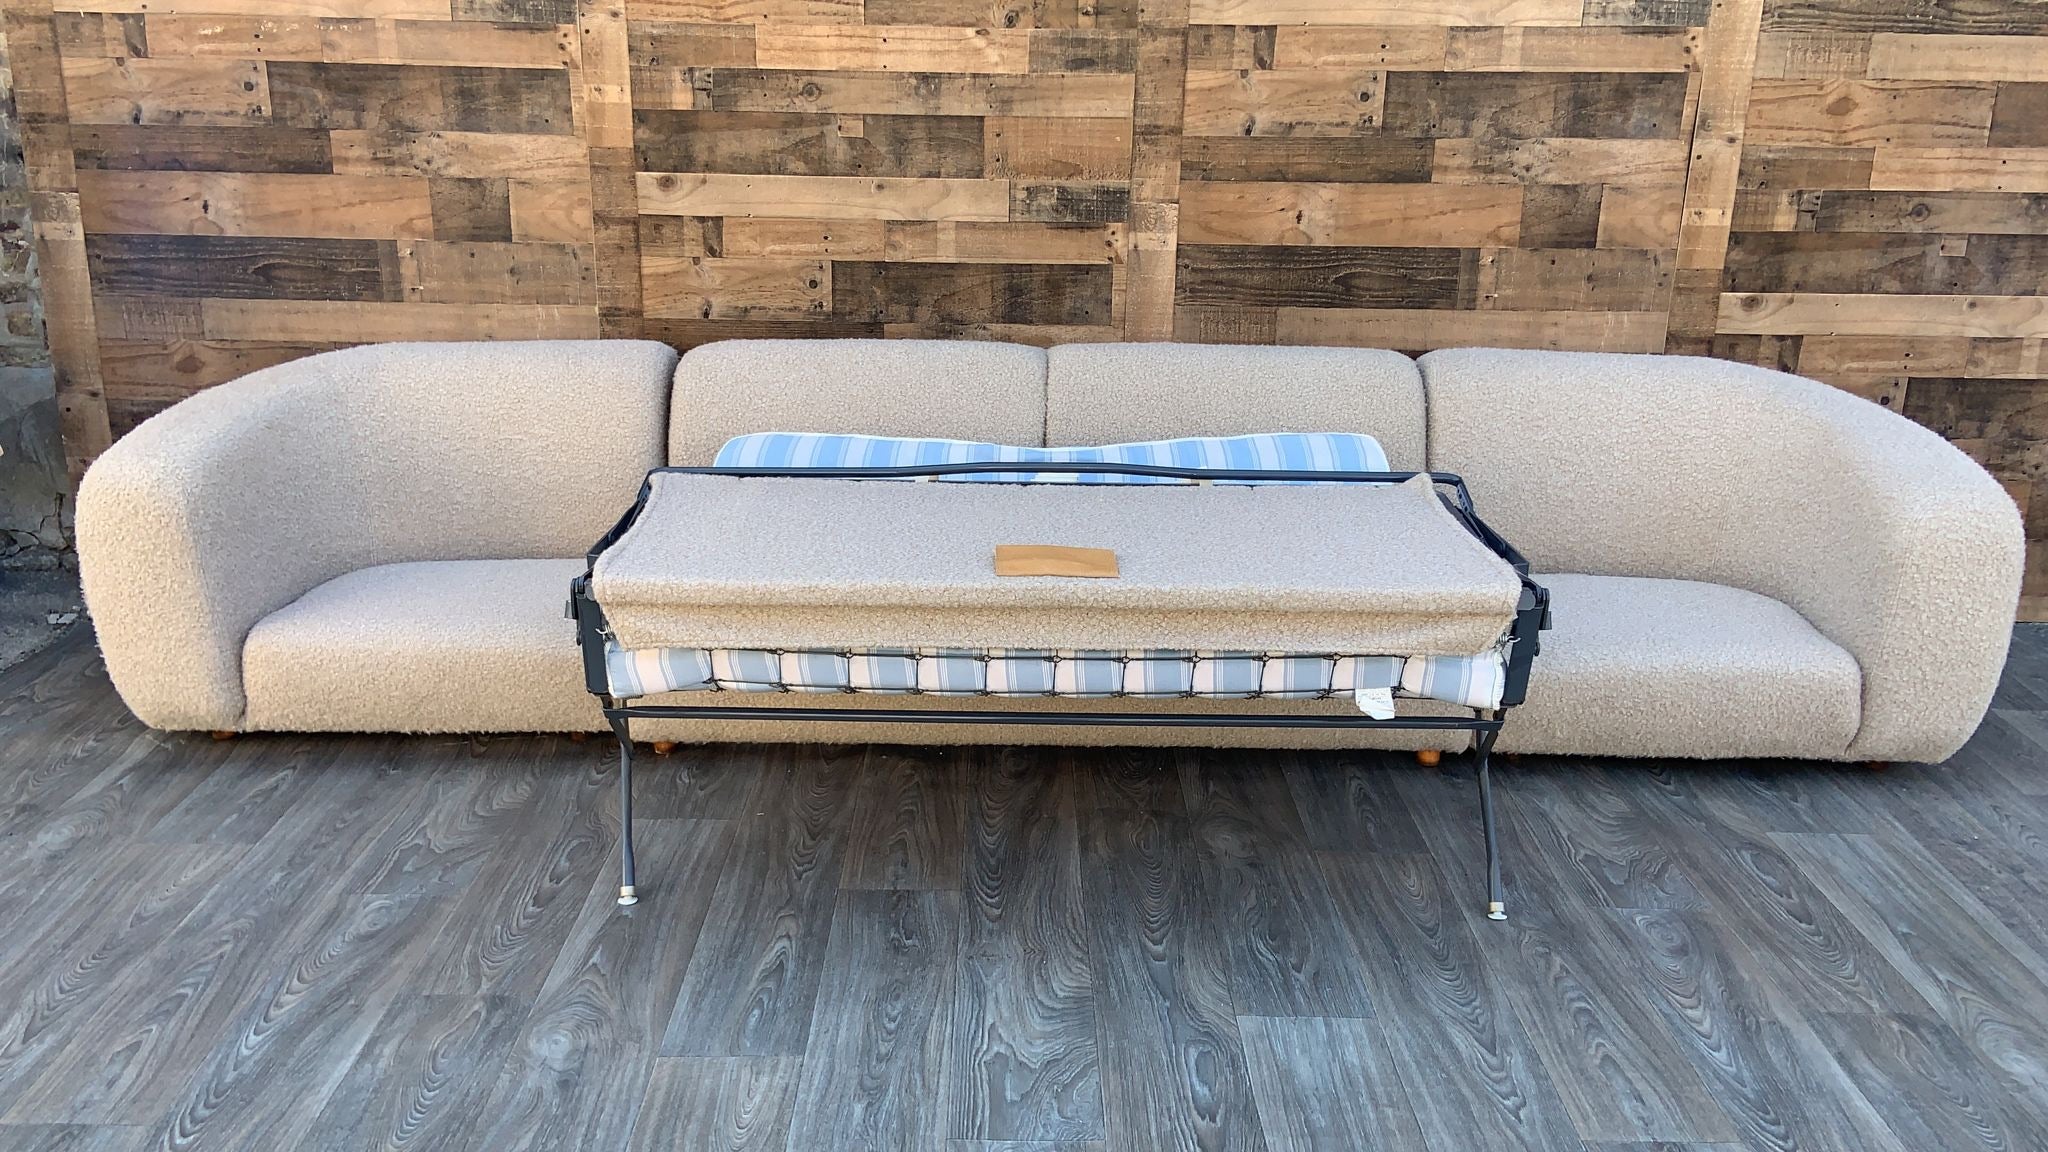 Vintage Mid Century Modern Karpen Sofa with Pullout Bed Retro Chic Furniture Set with Newly Upholstered Cushions!